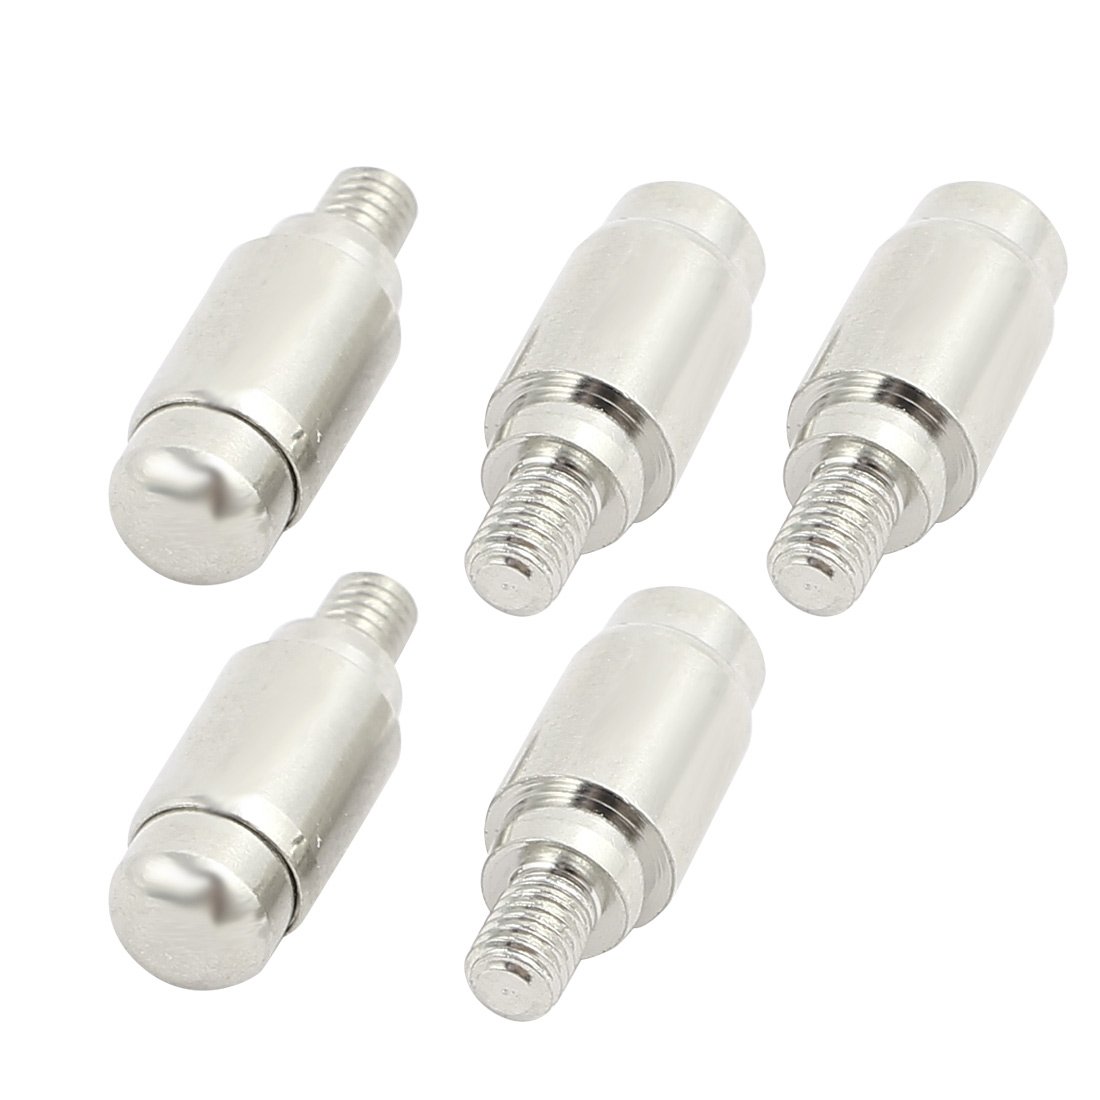 uxcell 5pcs p257 16mm lenght spring loaded contact testing test high current